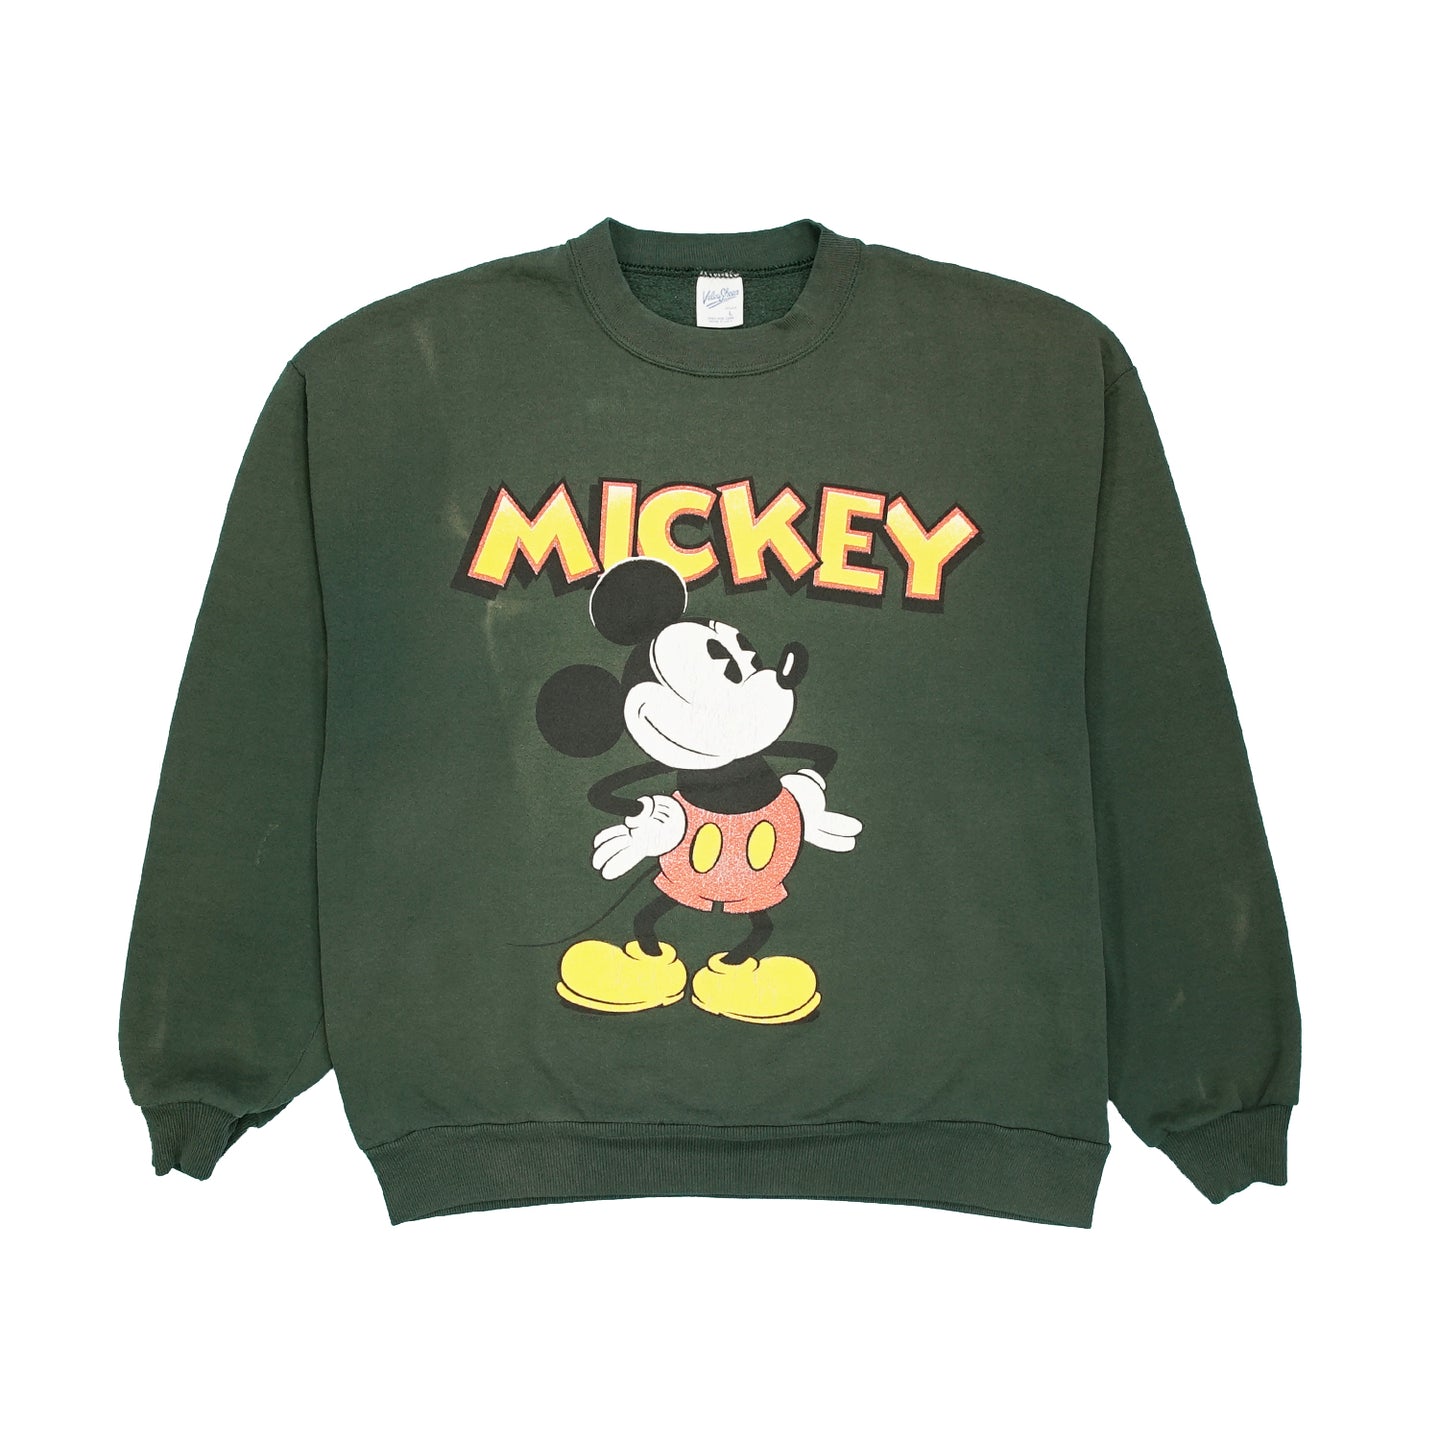 Vintage Mickey Mouse faded crewneck L